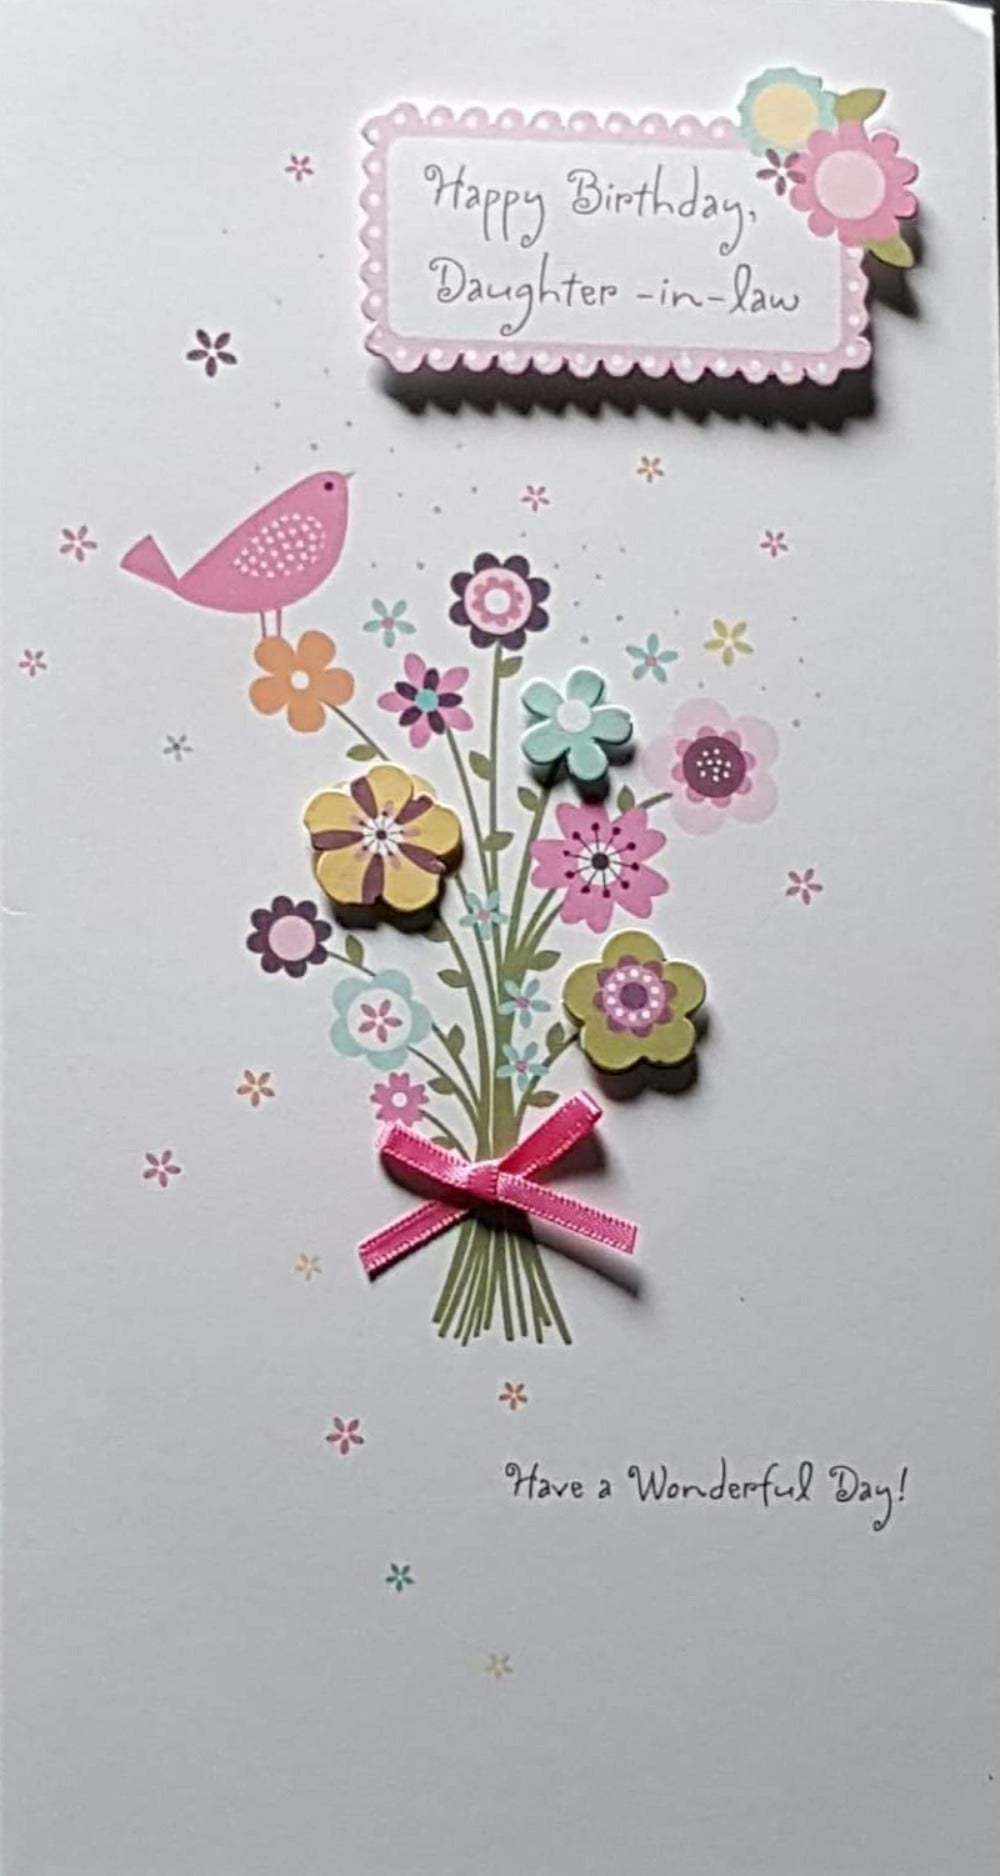 Birthday Card - Daughter In Law / Two Large Pink Flowers